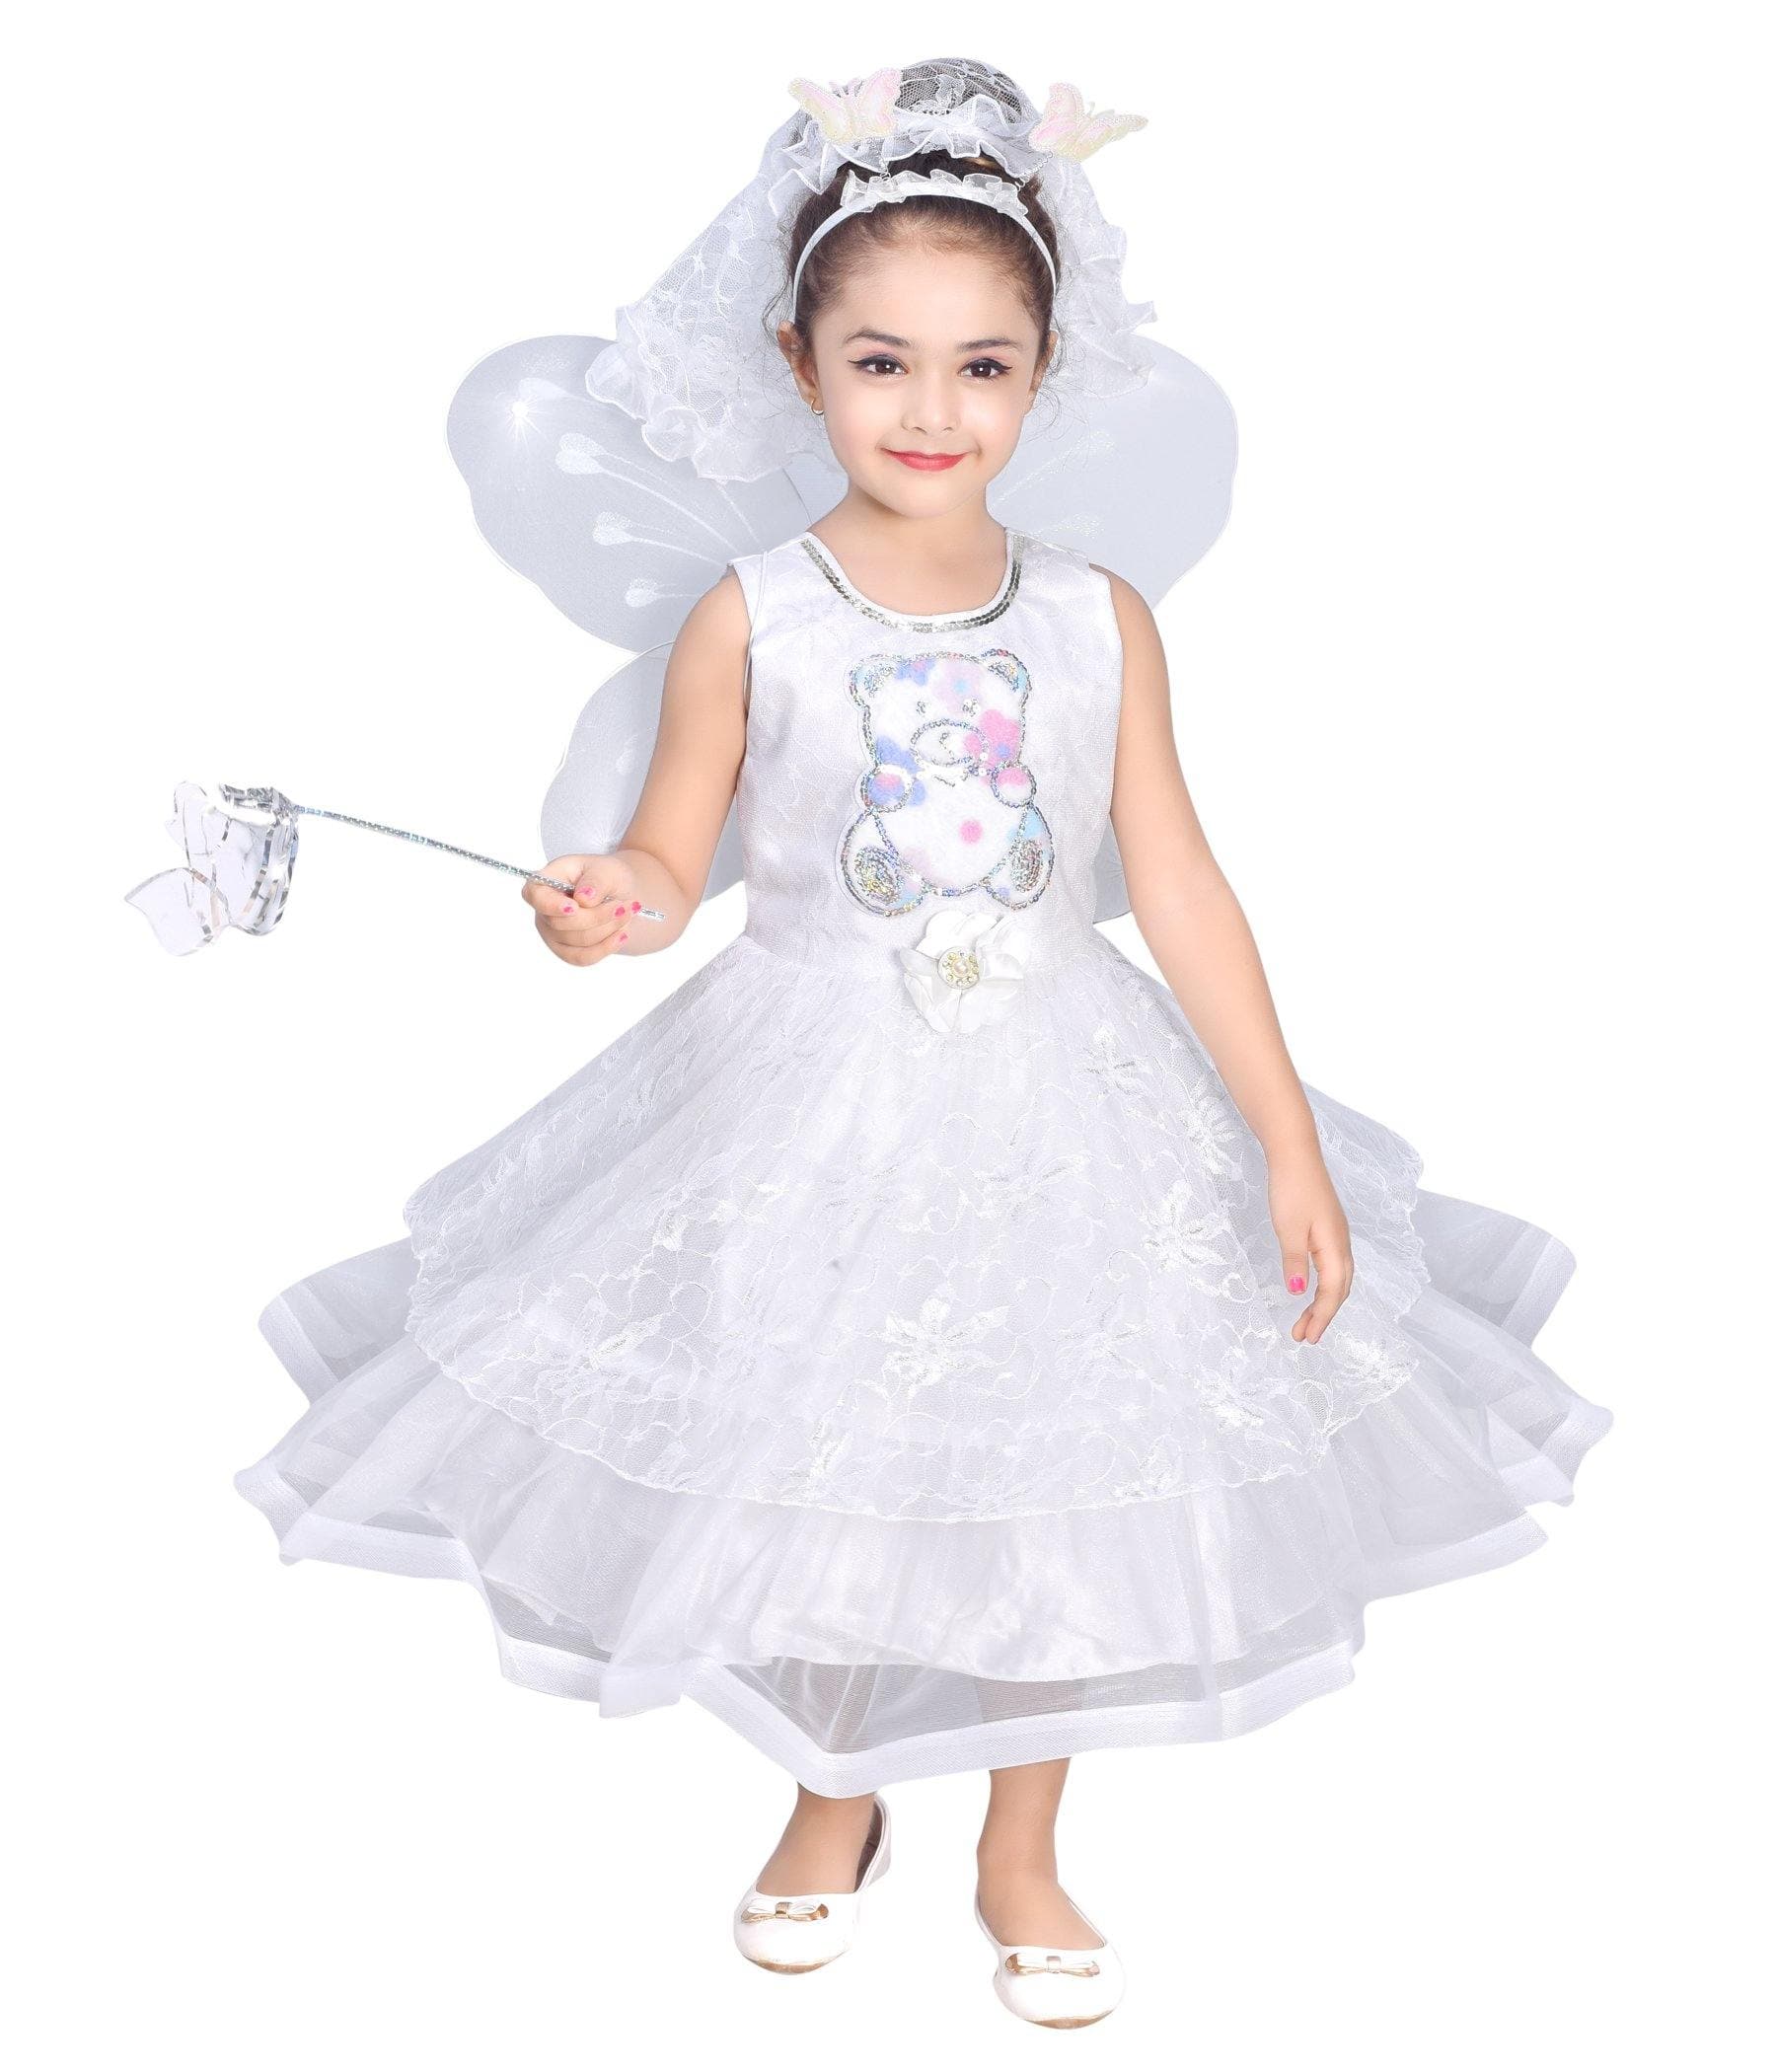 Pin by Pari Creation on baby frock | Flower girl dresses, Girls dresses,  Party dress